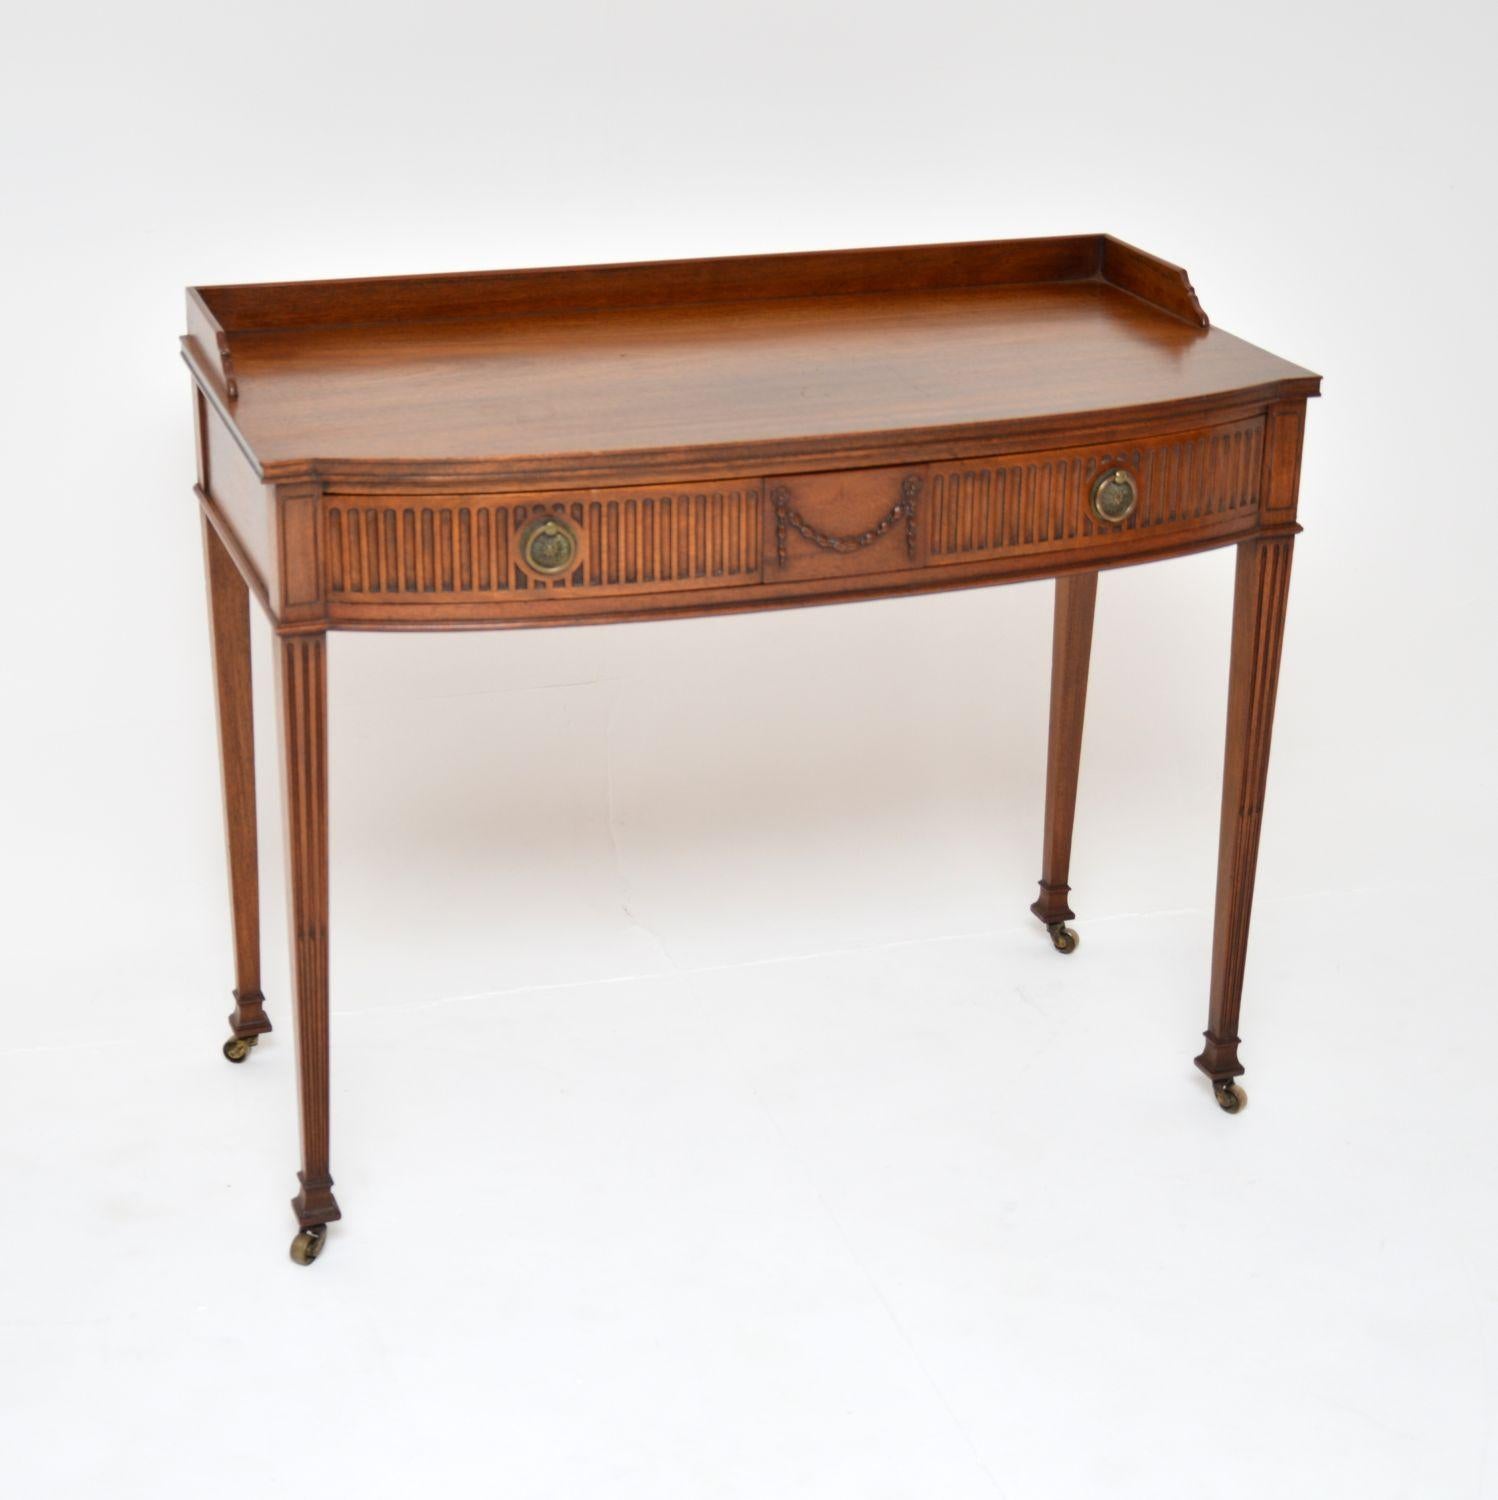 This superb antique Sheraton revival table could be used as a writing table or a side side table. This was made in England, it dates from the 1900-1910 period.

It is extremely well made and is of fantastic quality. The single drawer has beautiful